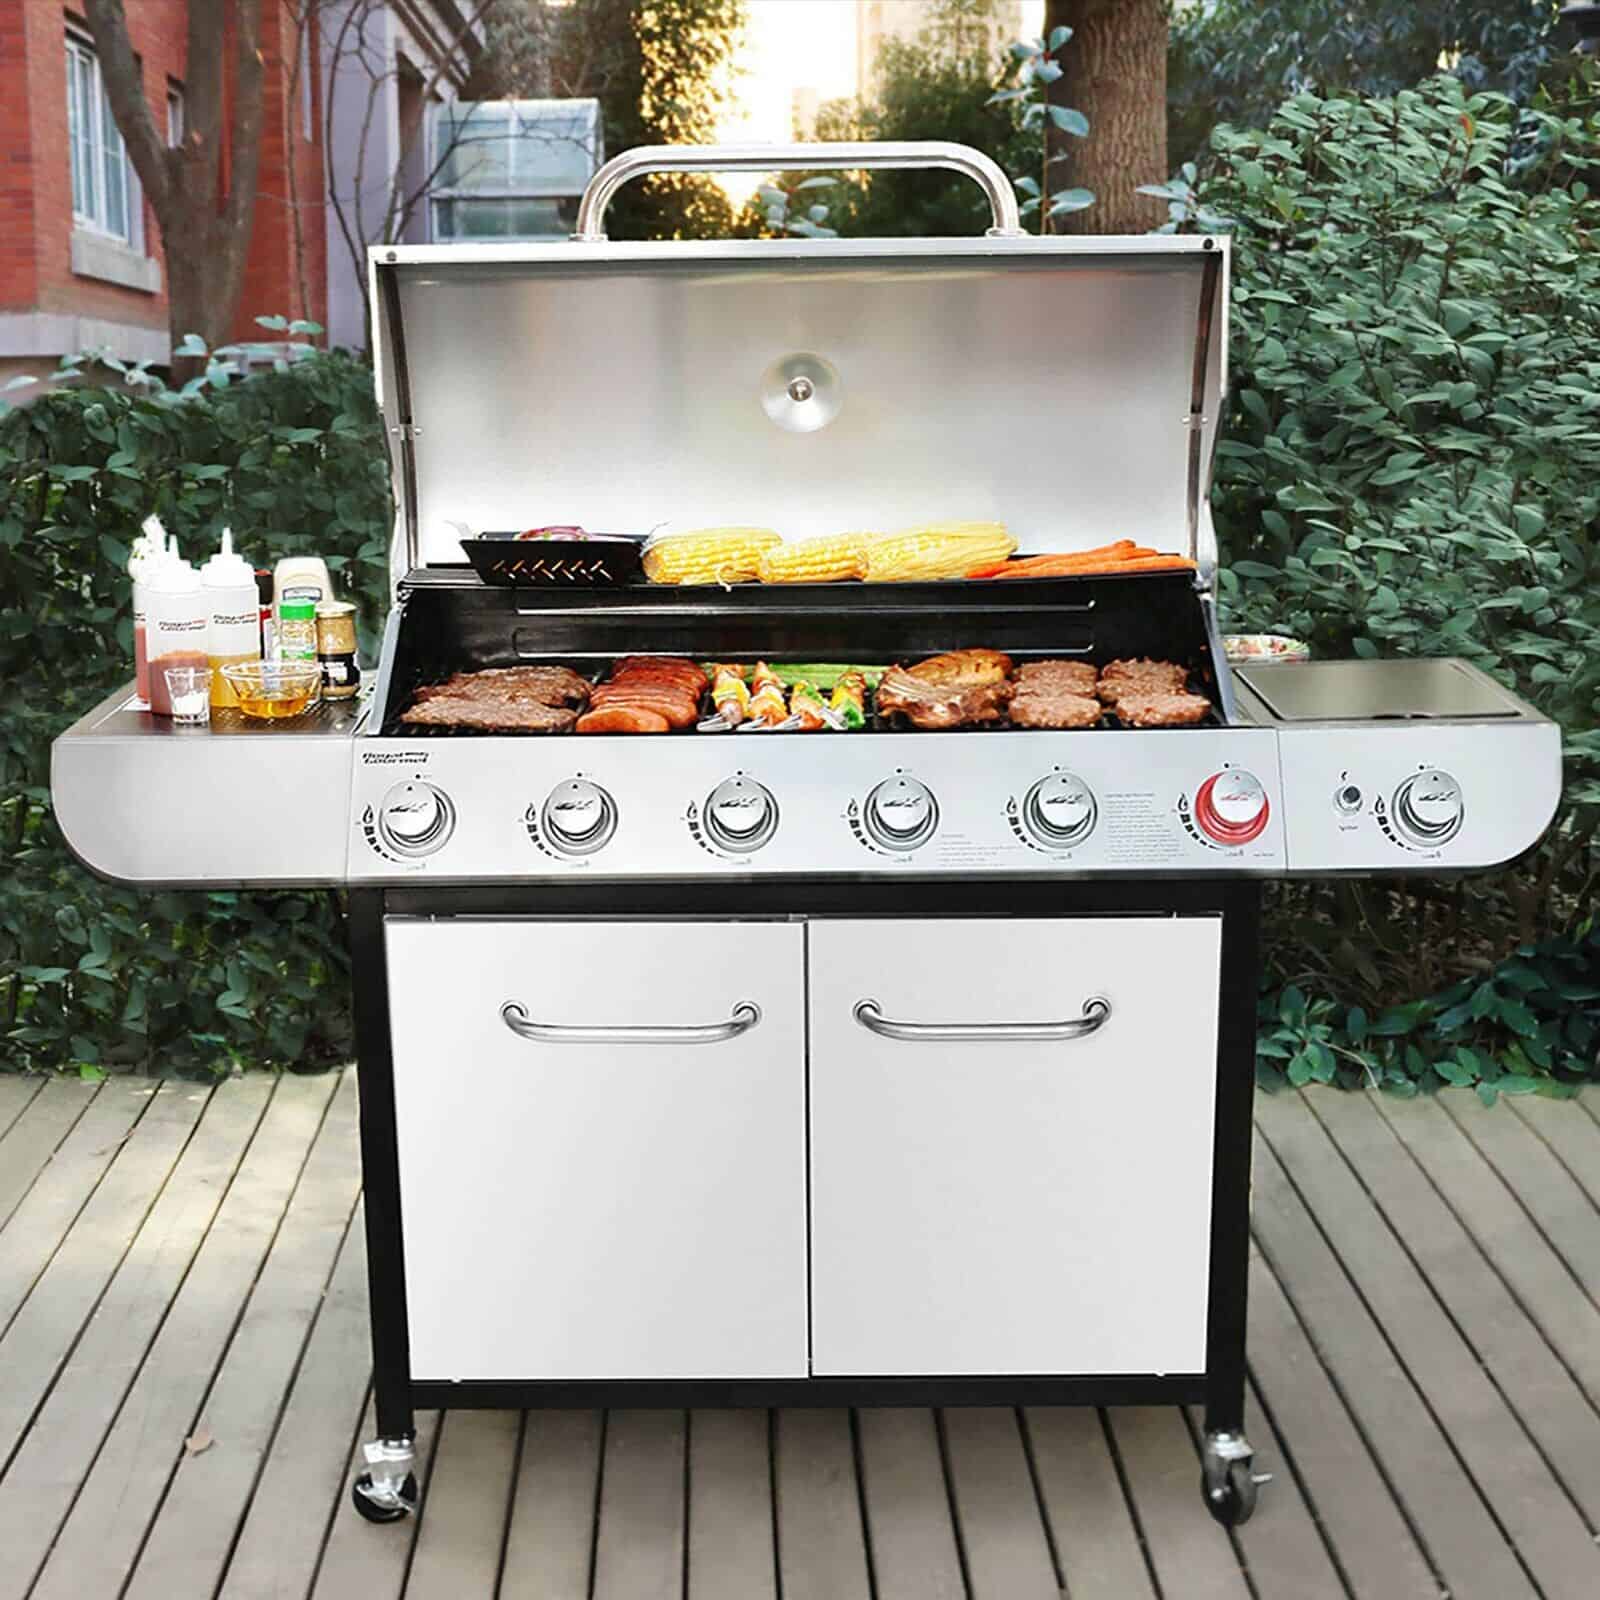 A gas grill with two burners and a side burner.